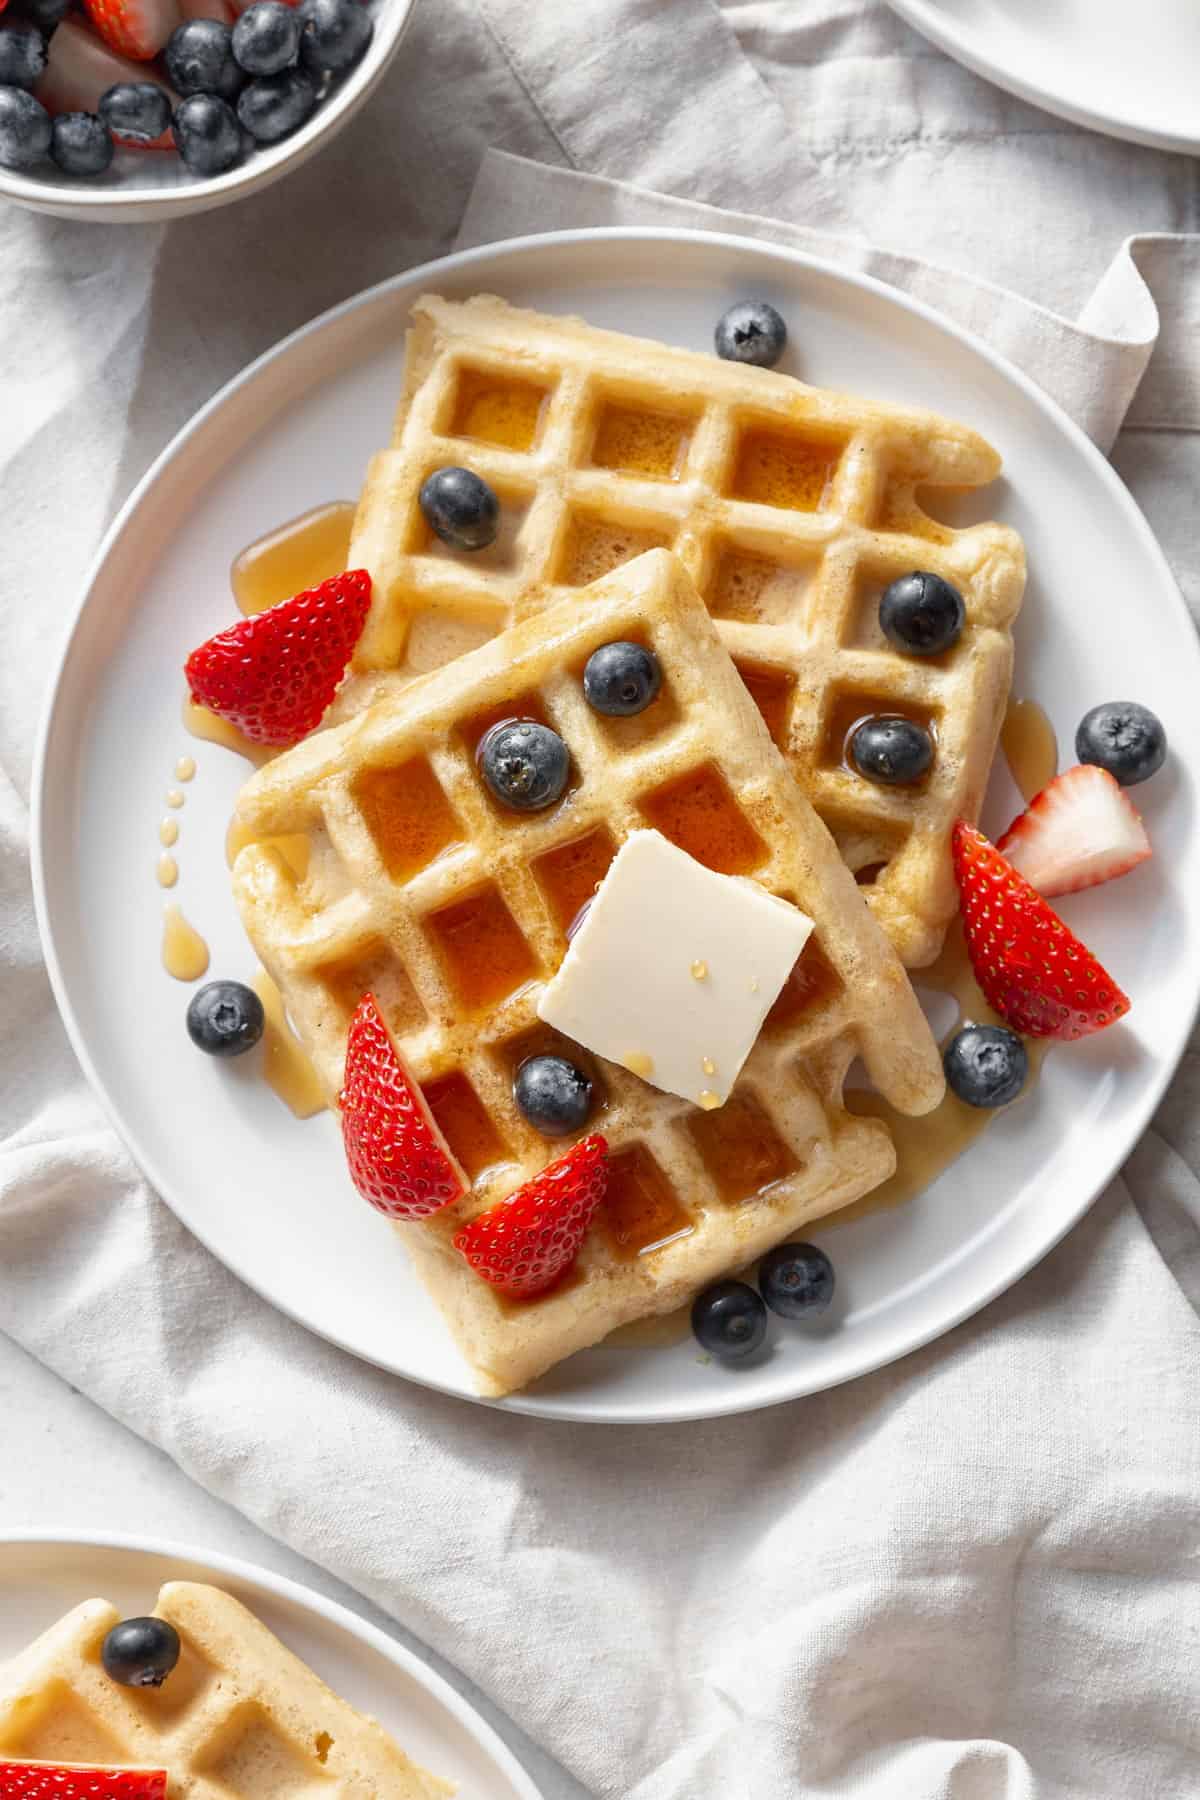 Gluten free waffles on a plate with butter, blueberries, and strawberries on top.